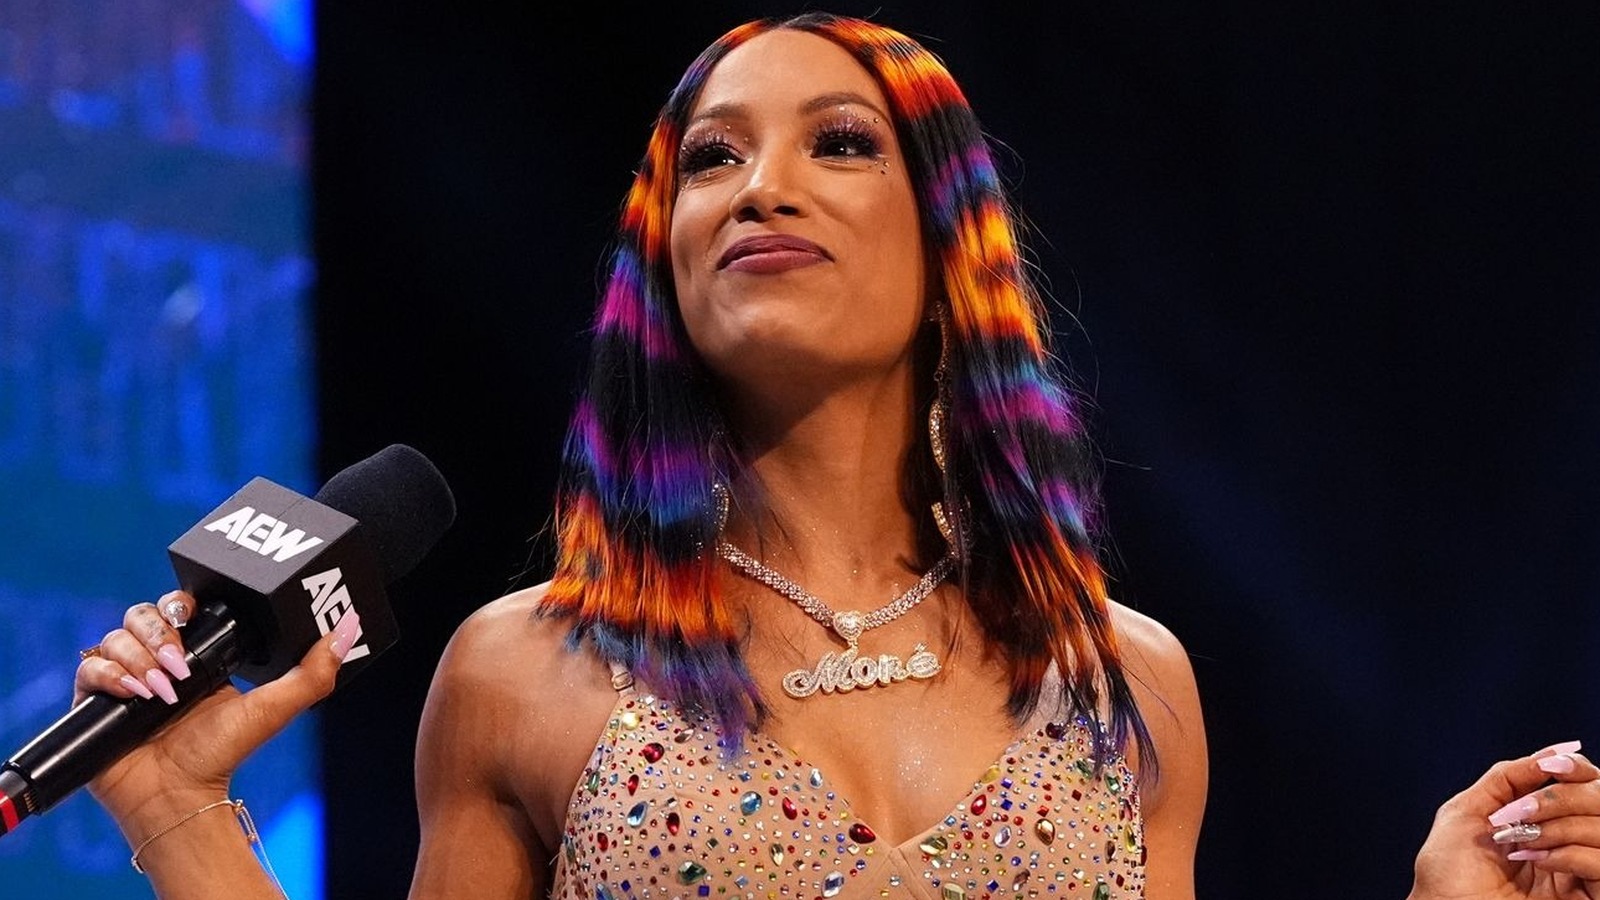 Mercedes Mone Shares Workout Video Ahead Of In-Ring Return At AEW Double Or Nothing